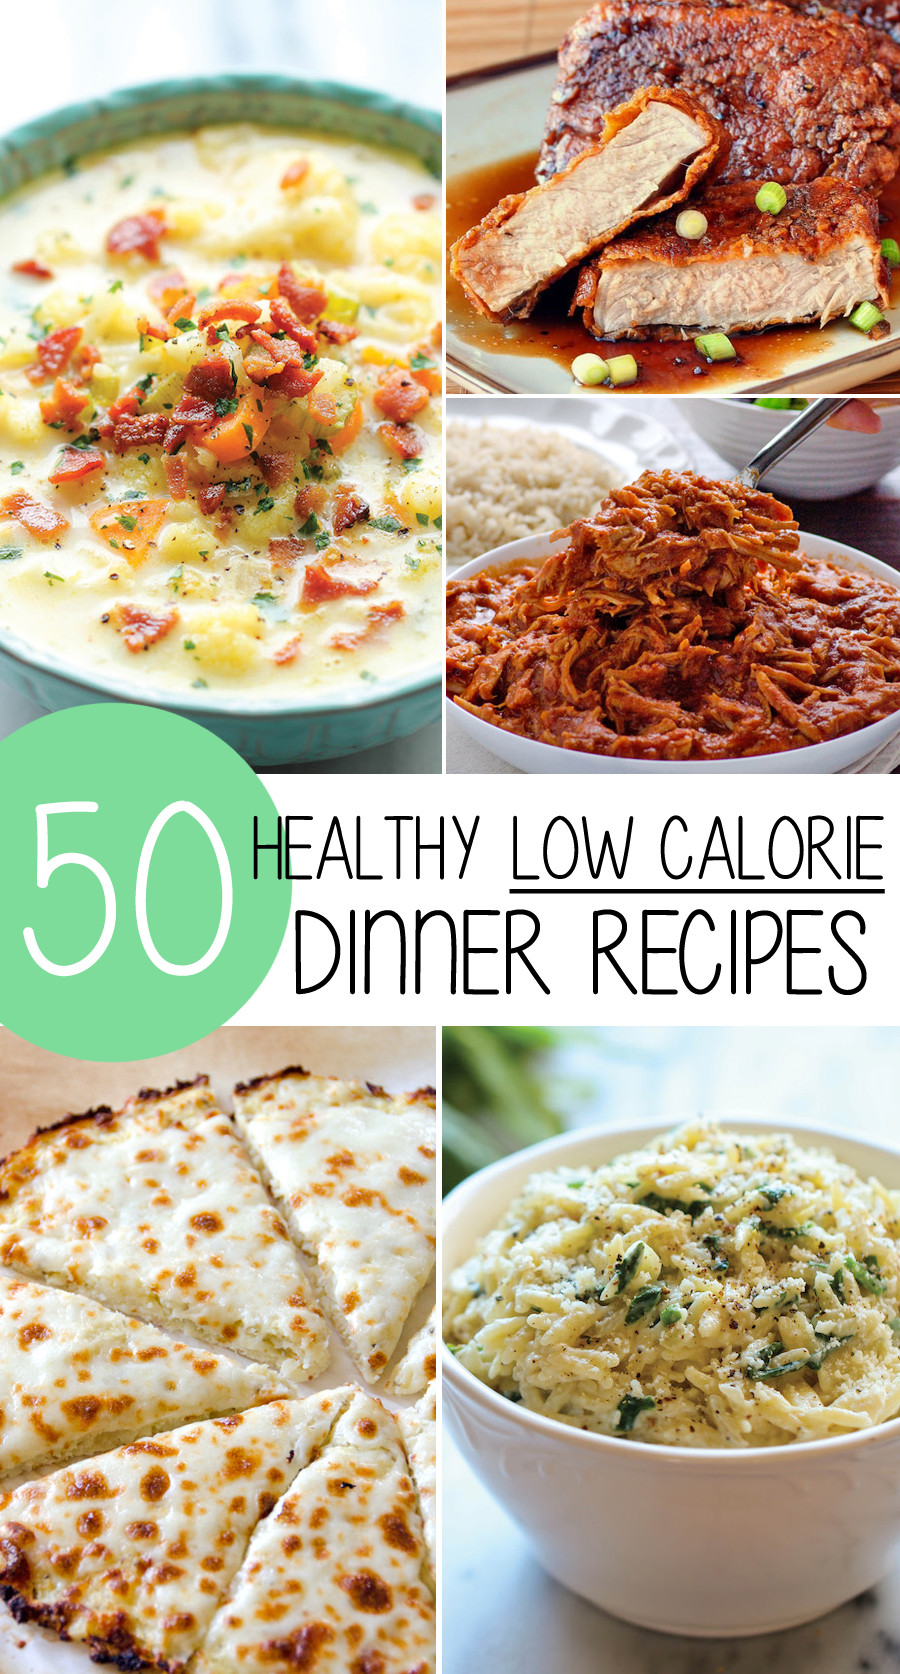 Quick Low Calorie Dinners
 50 Healthy Low Calorie Weight Loss Dinner Recipes